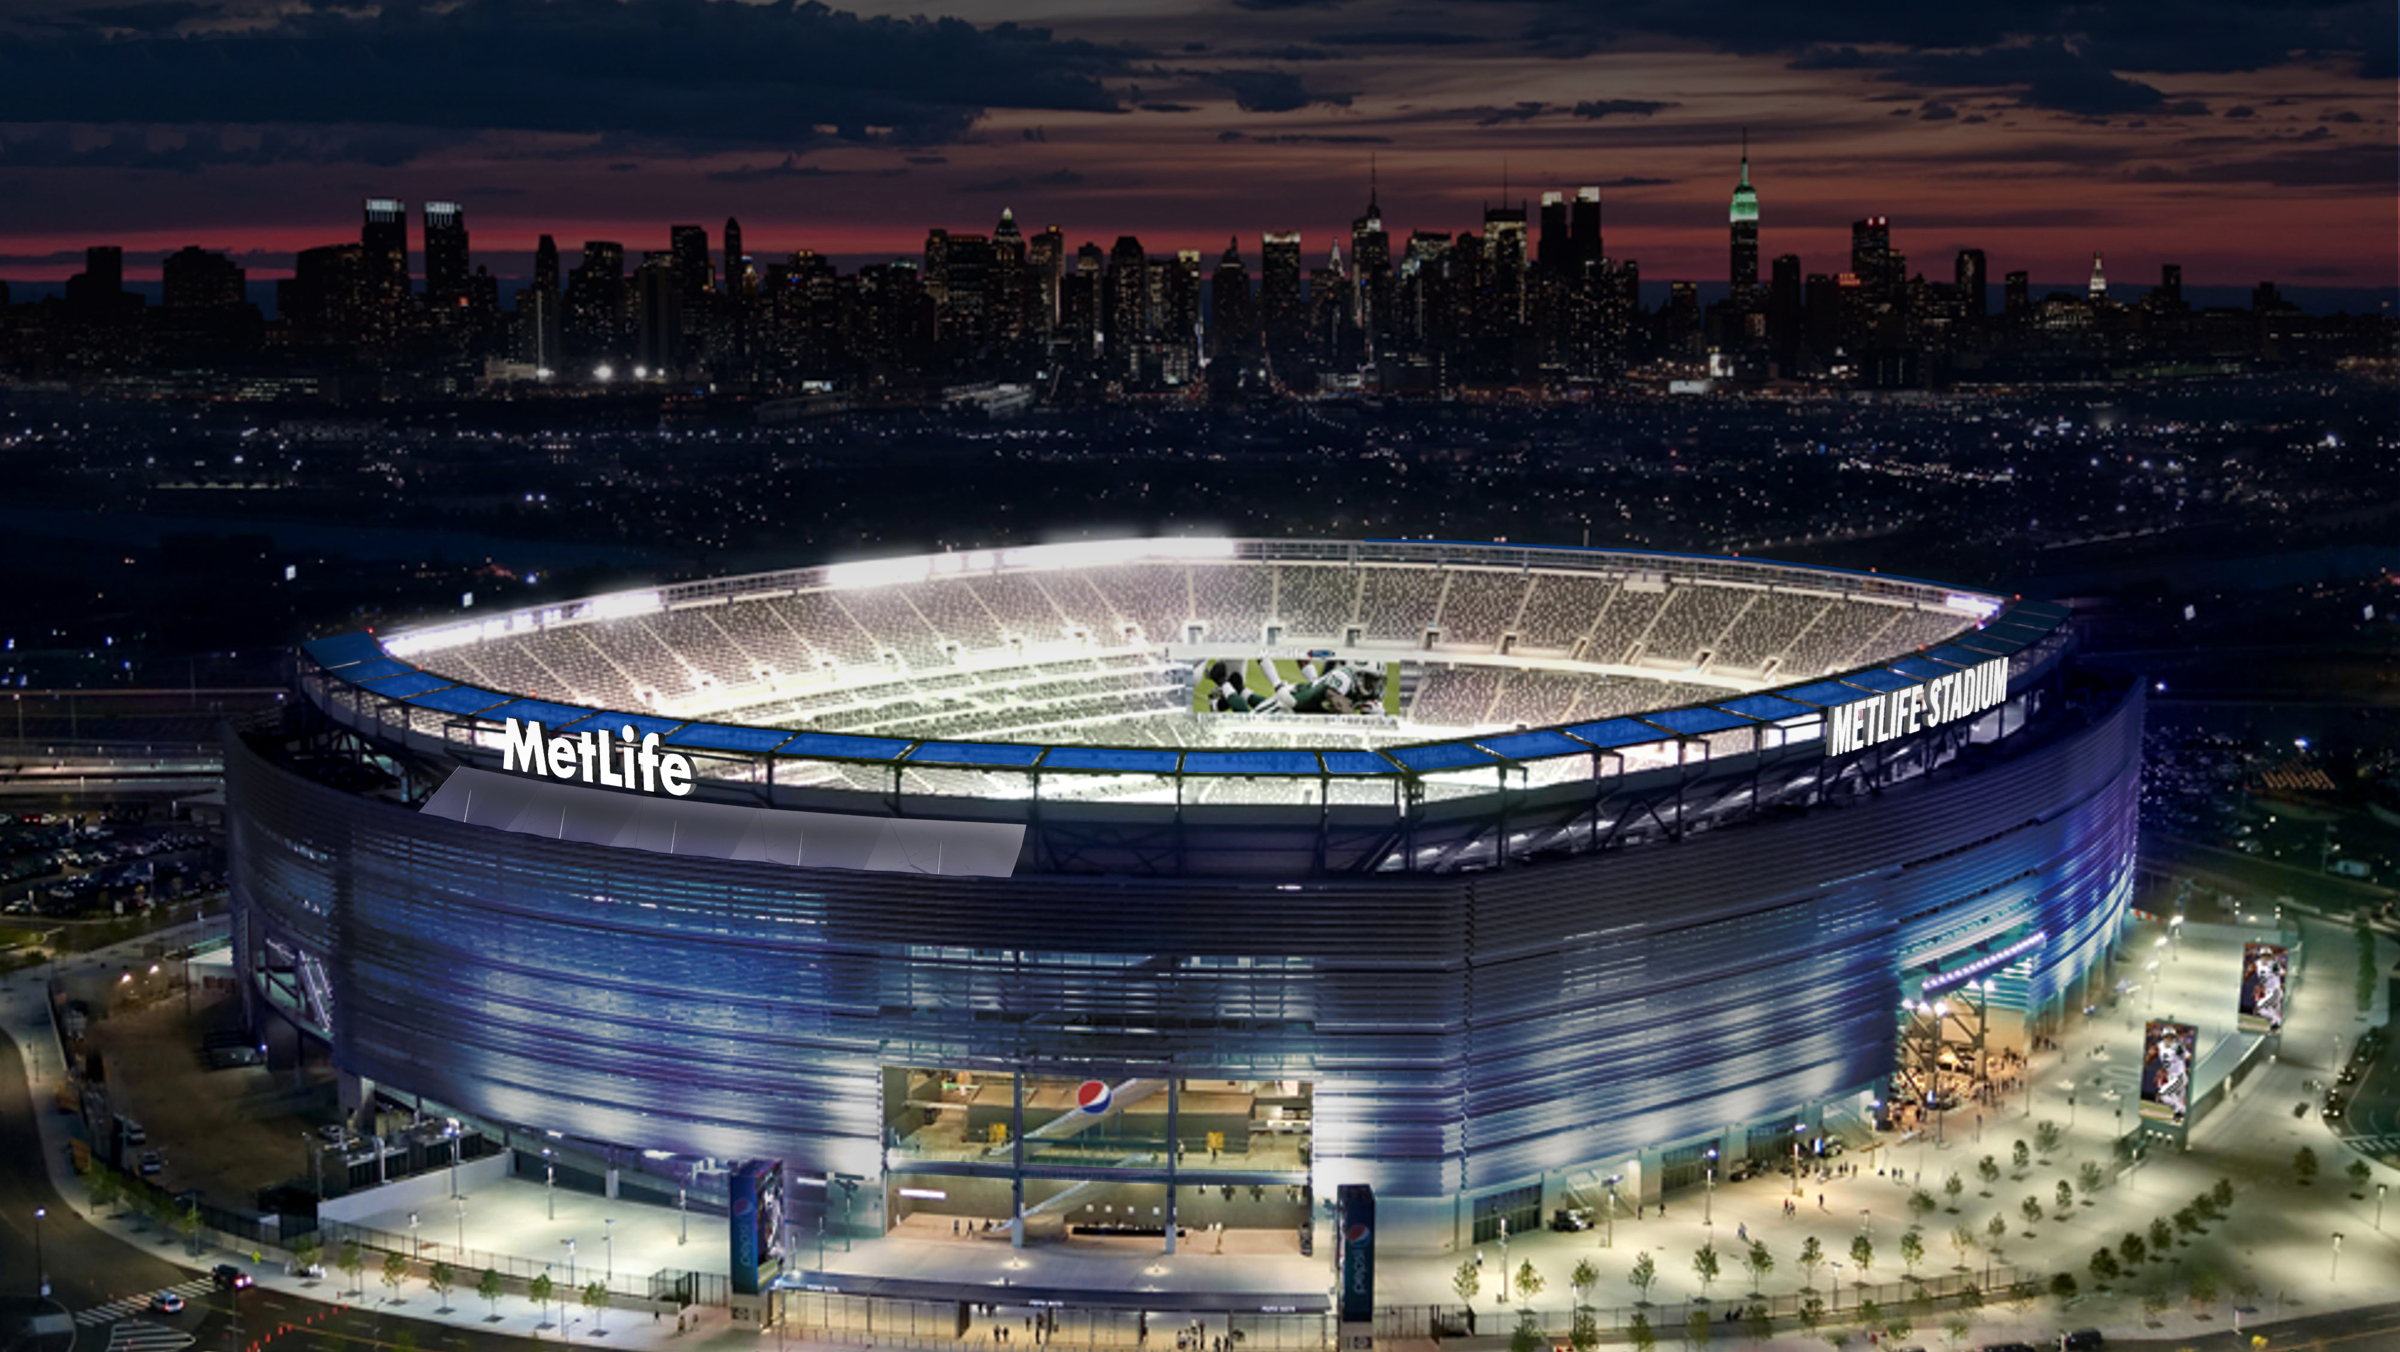 From Giants to Jets: Morphing MetLife Stadium 